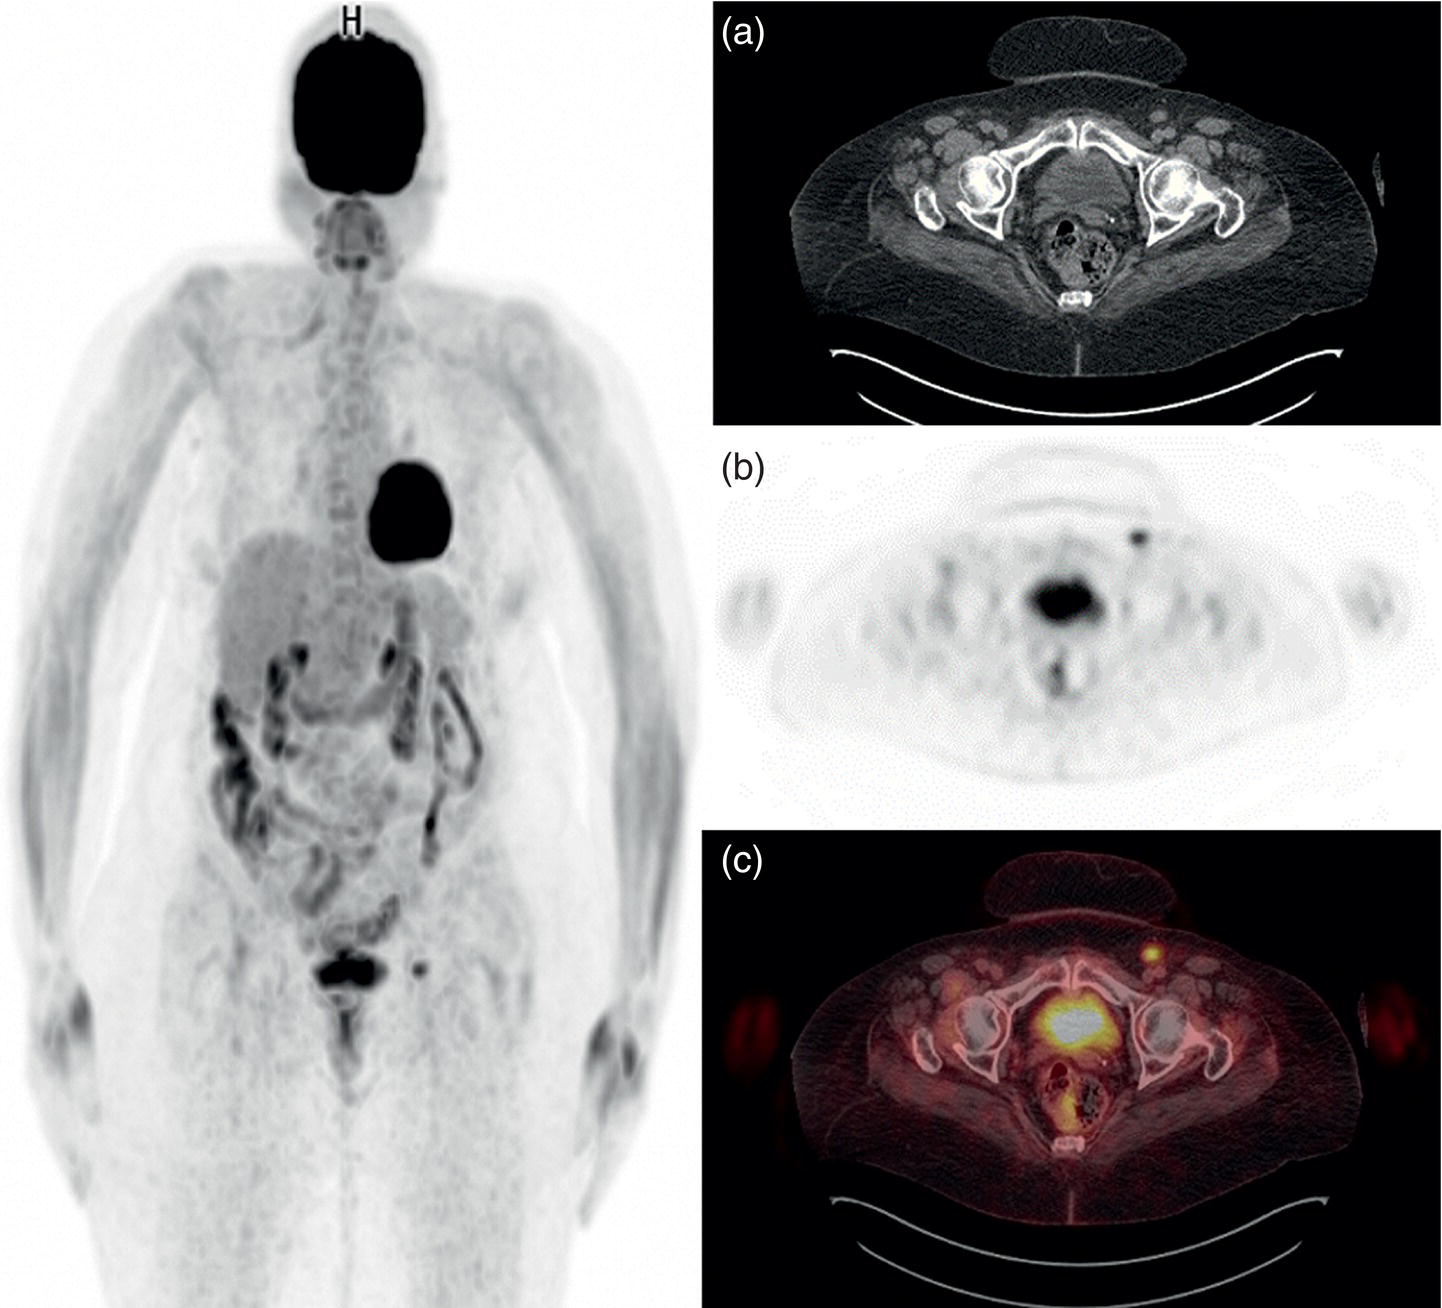 Schematic illustration of a 70-year-old woman who proved to have endometrial cancer after total abdominal hysterectomy and bilateral salpingo-oophorectomy.